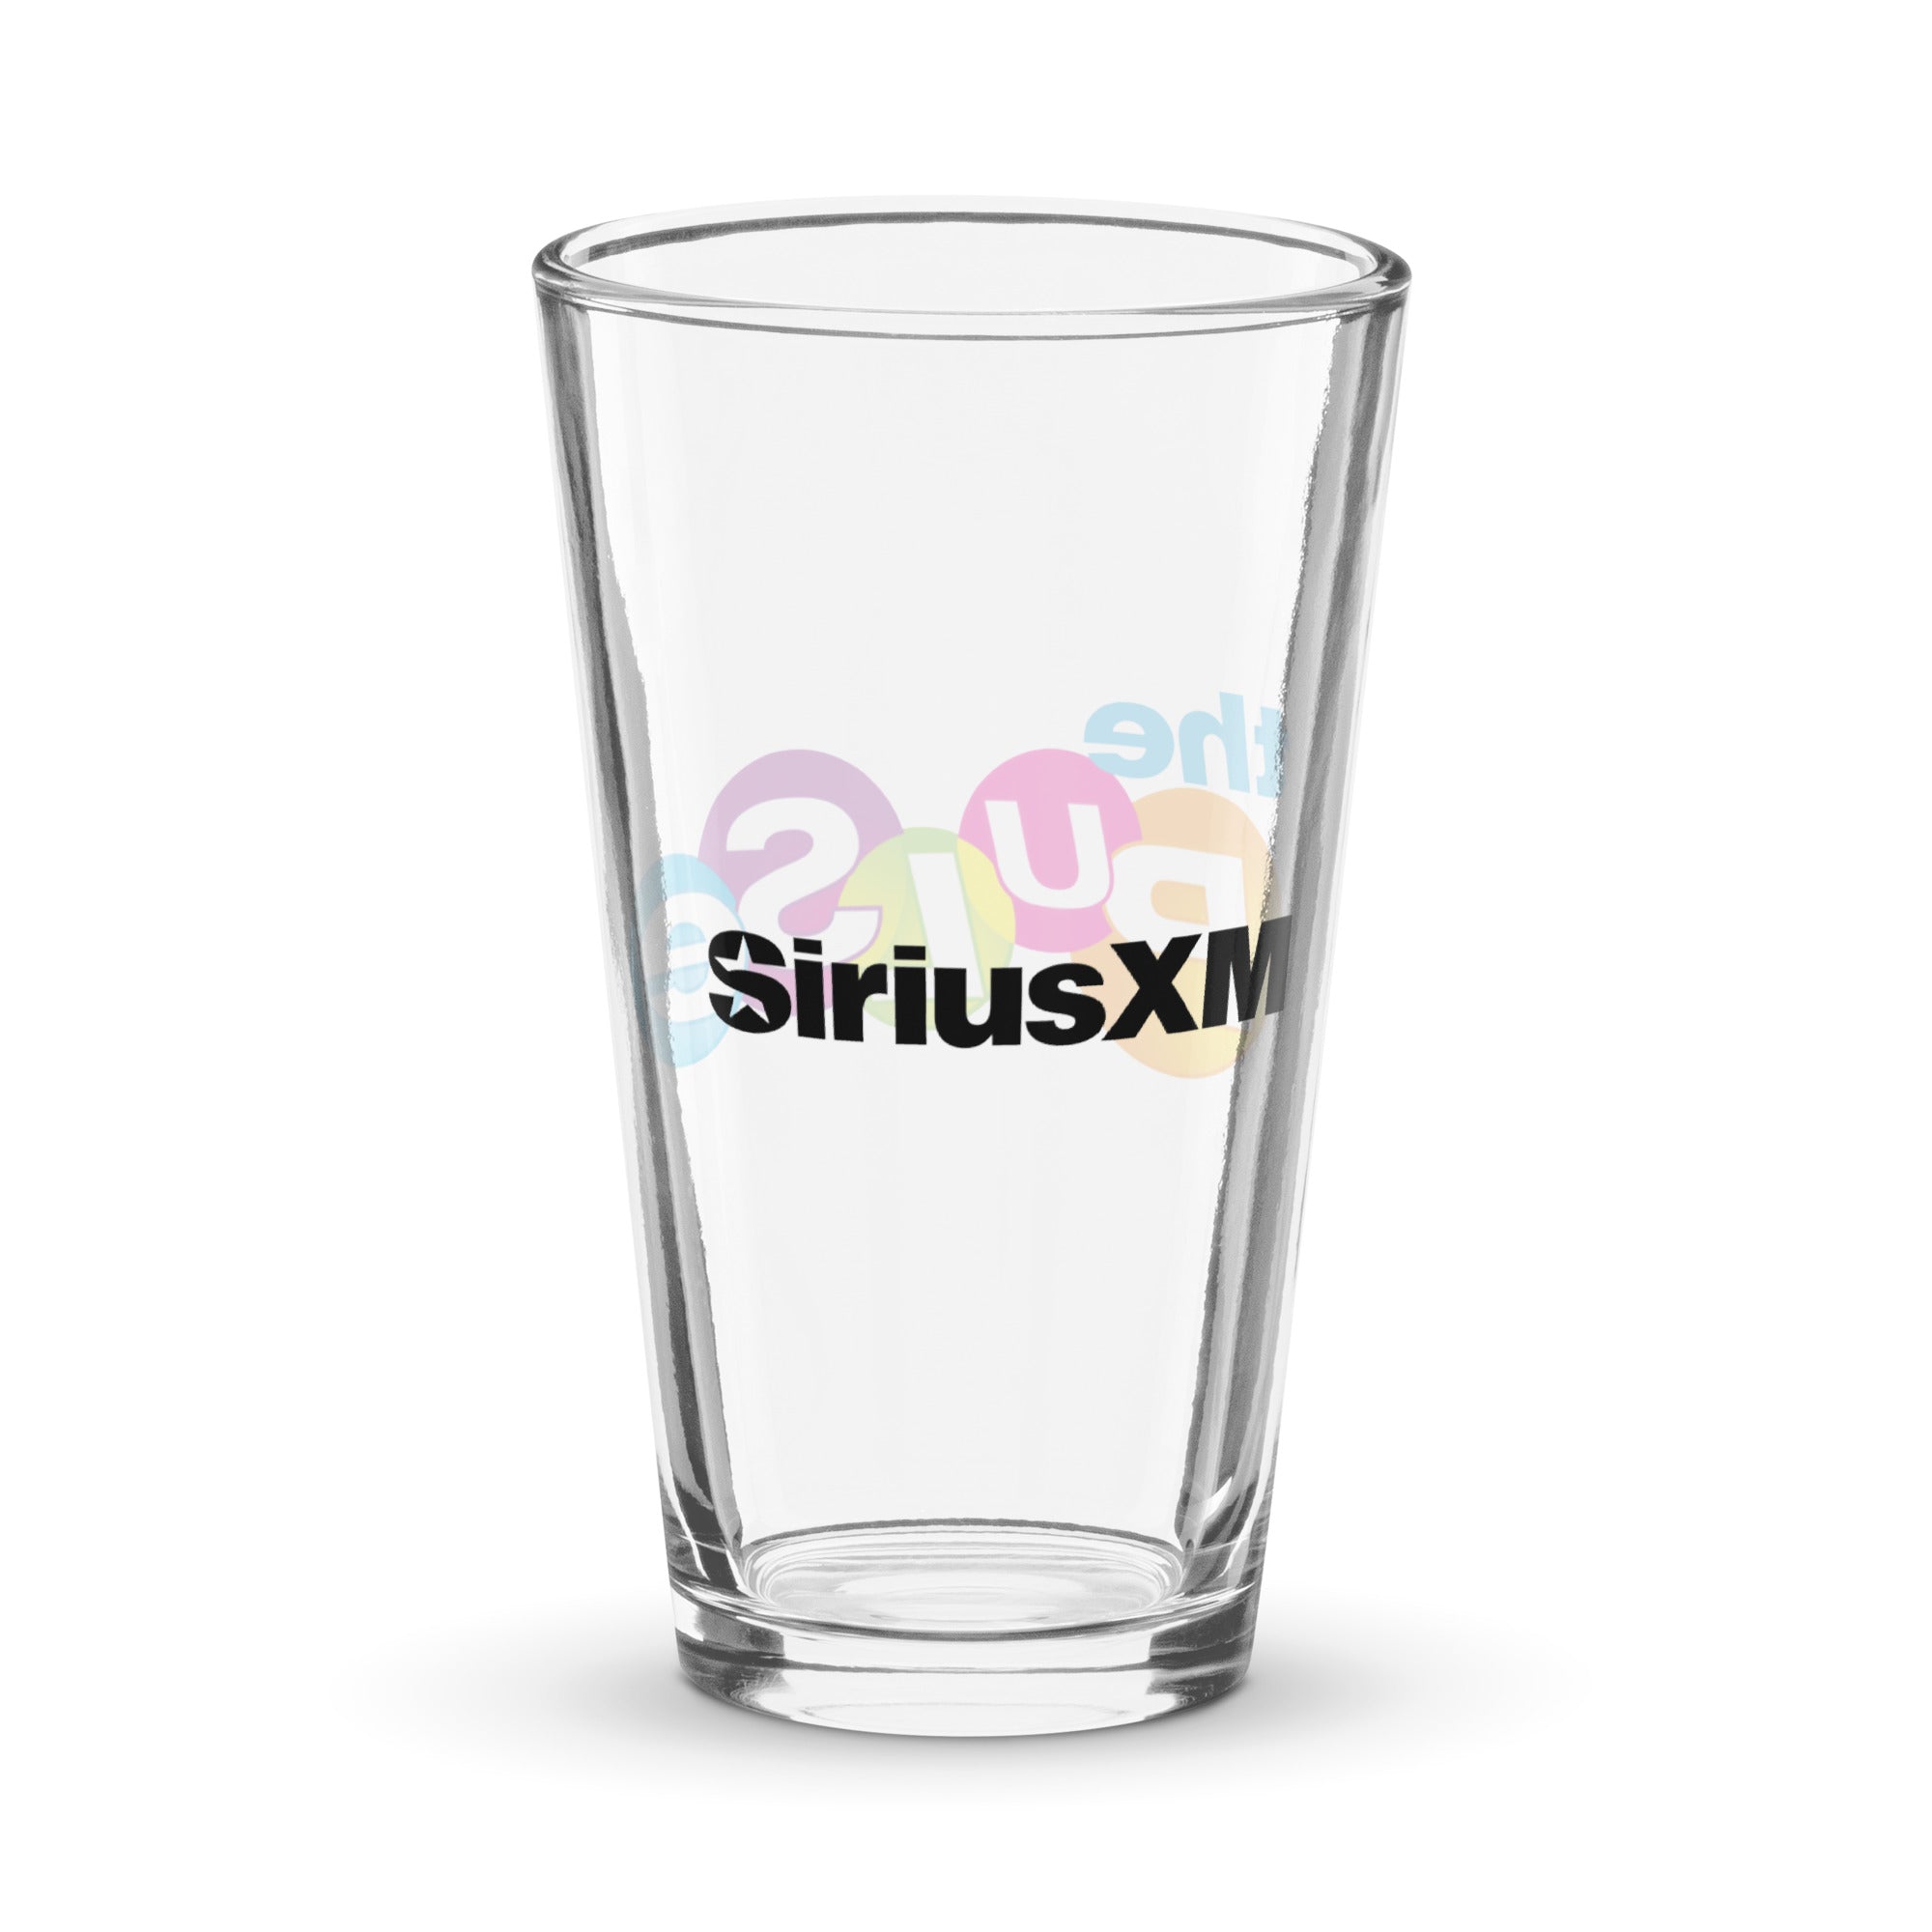 The Pulse: Pint Glass